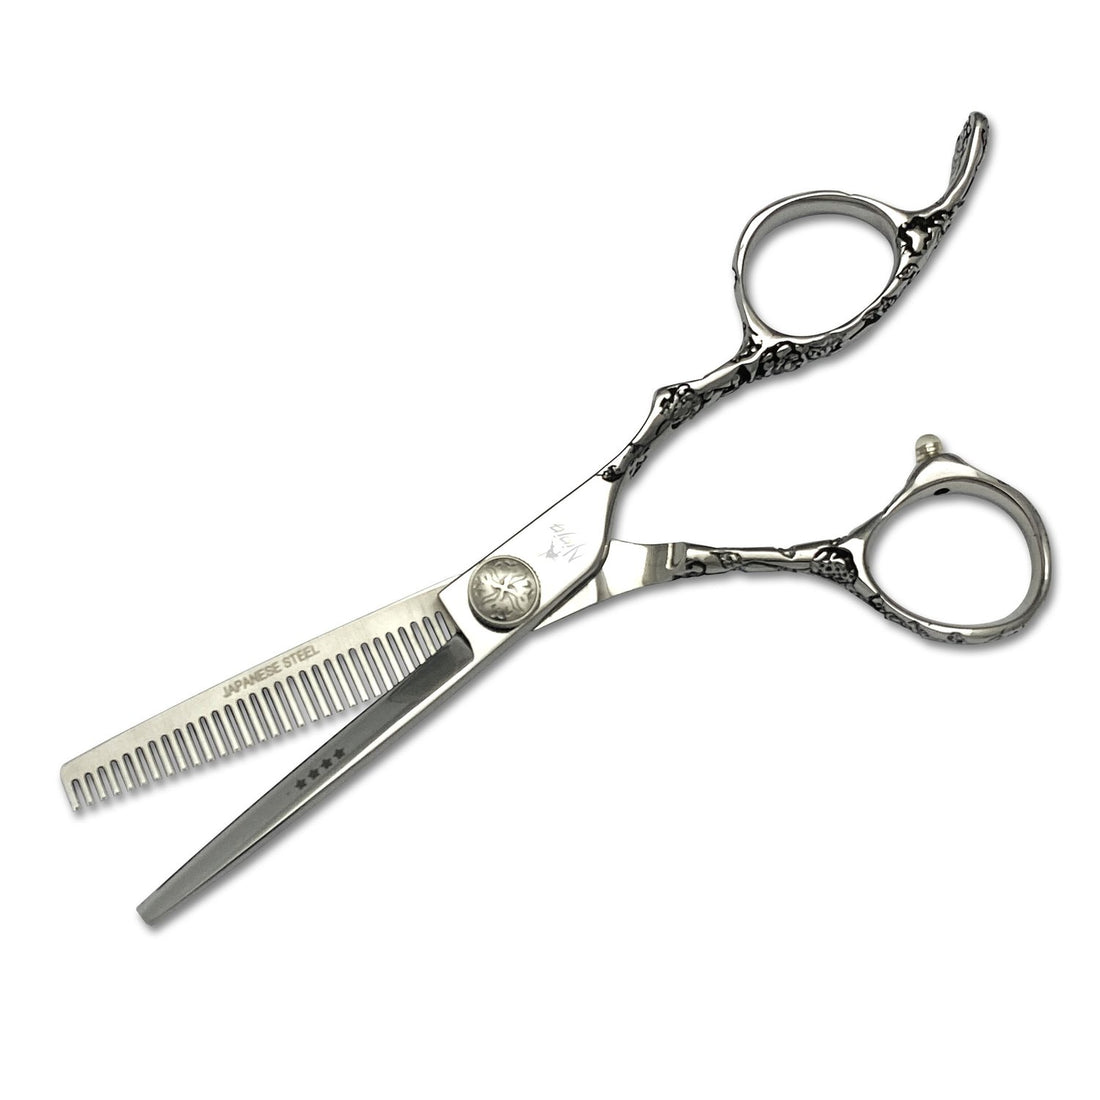 How to choose blending/thinning/texturizing shears